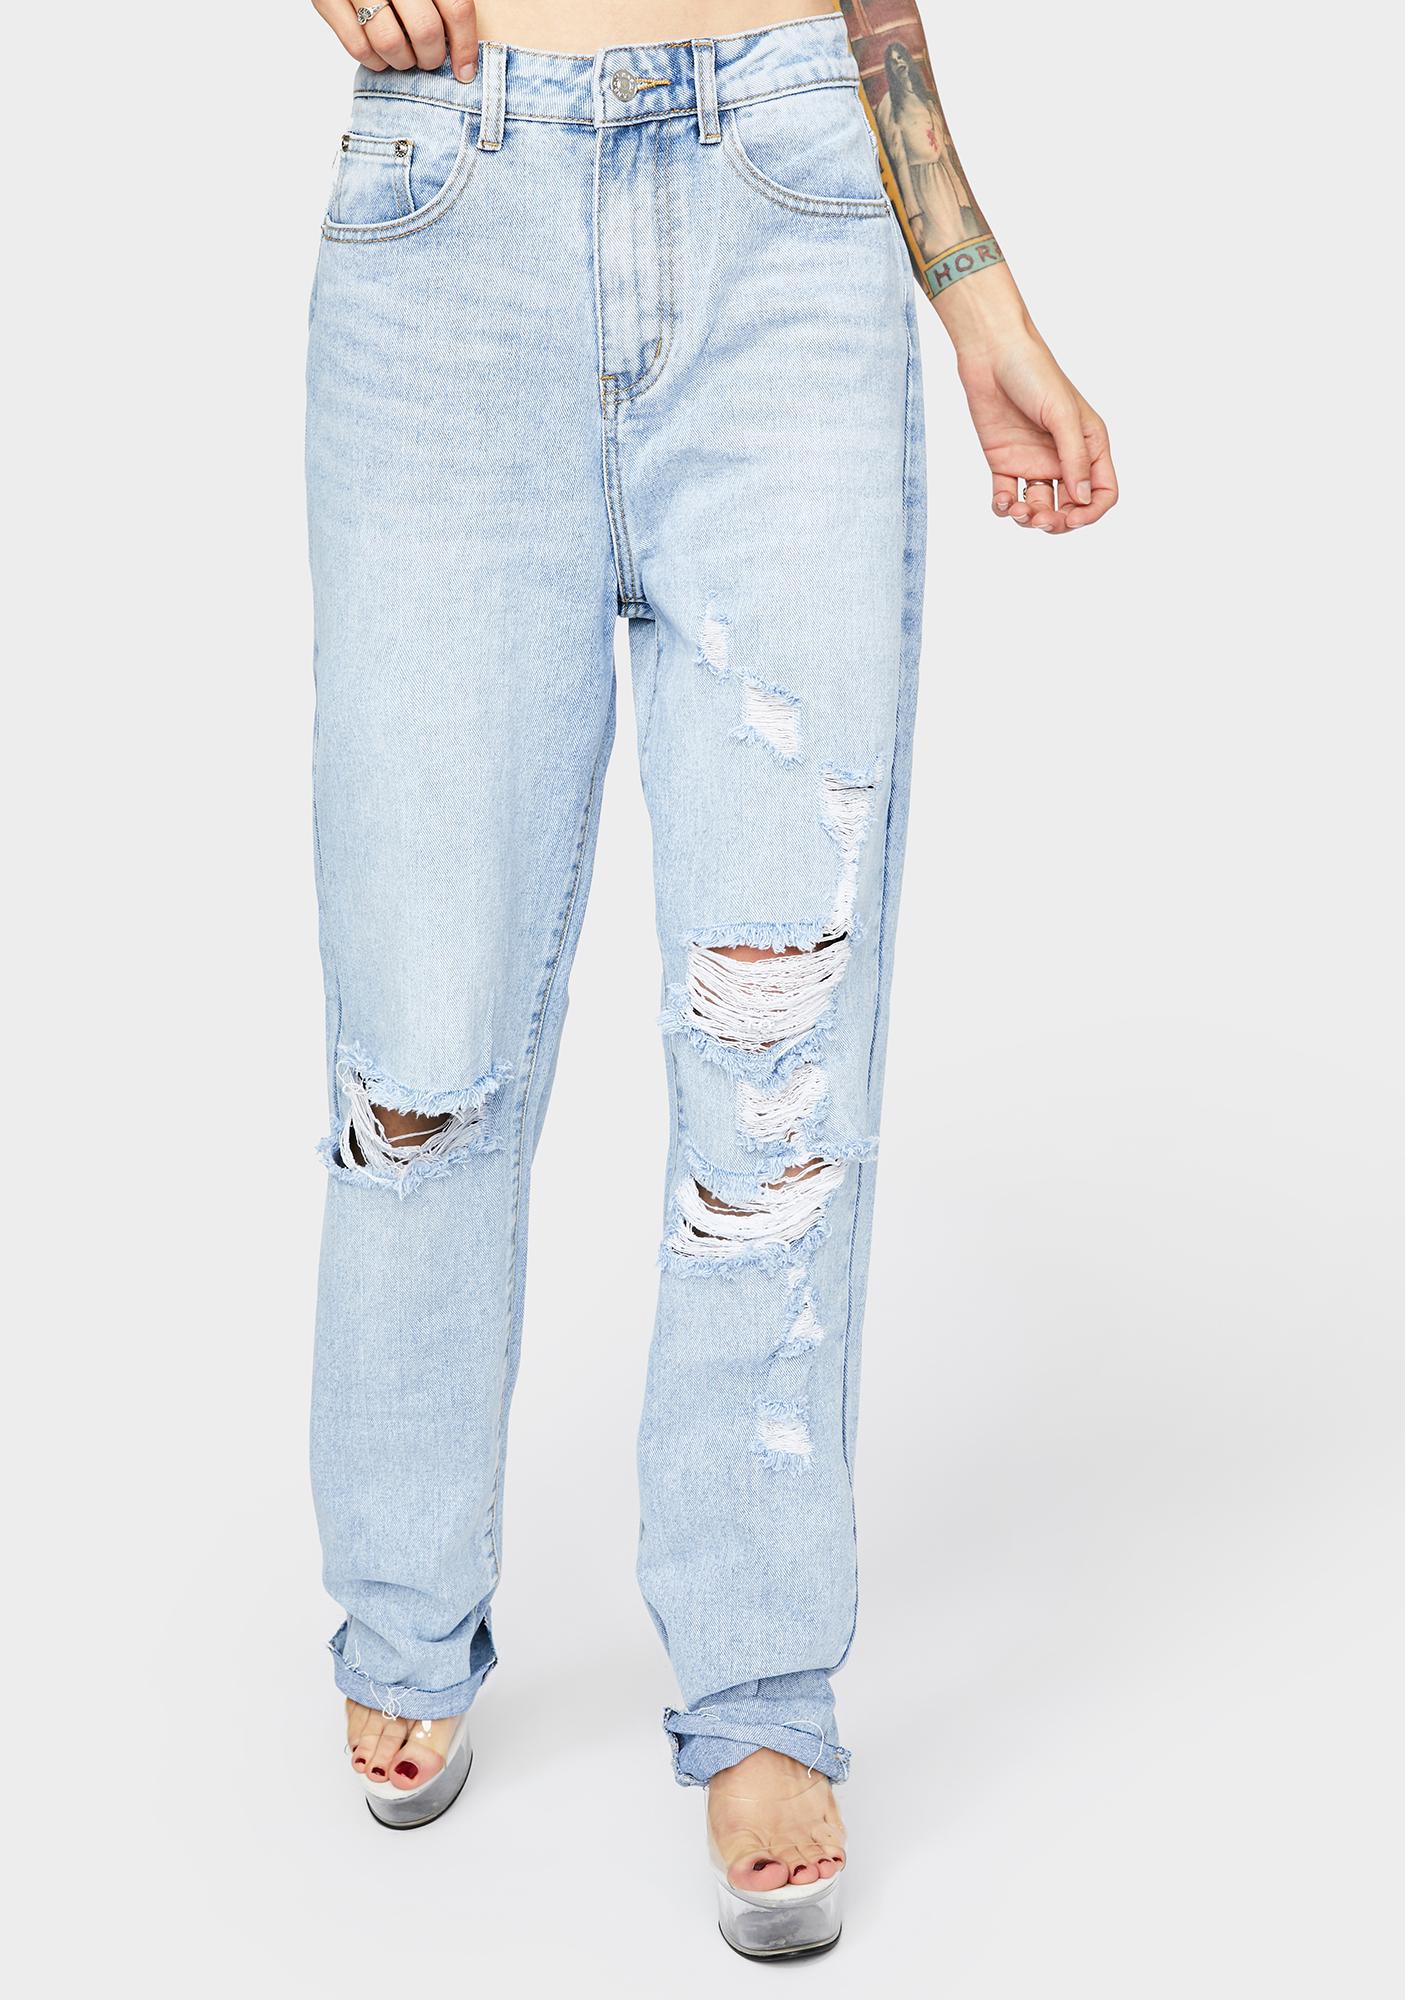 baggy jeans